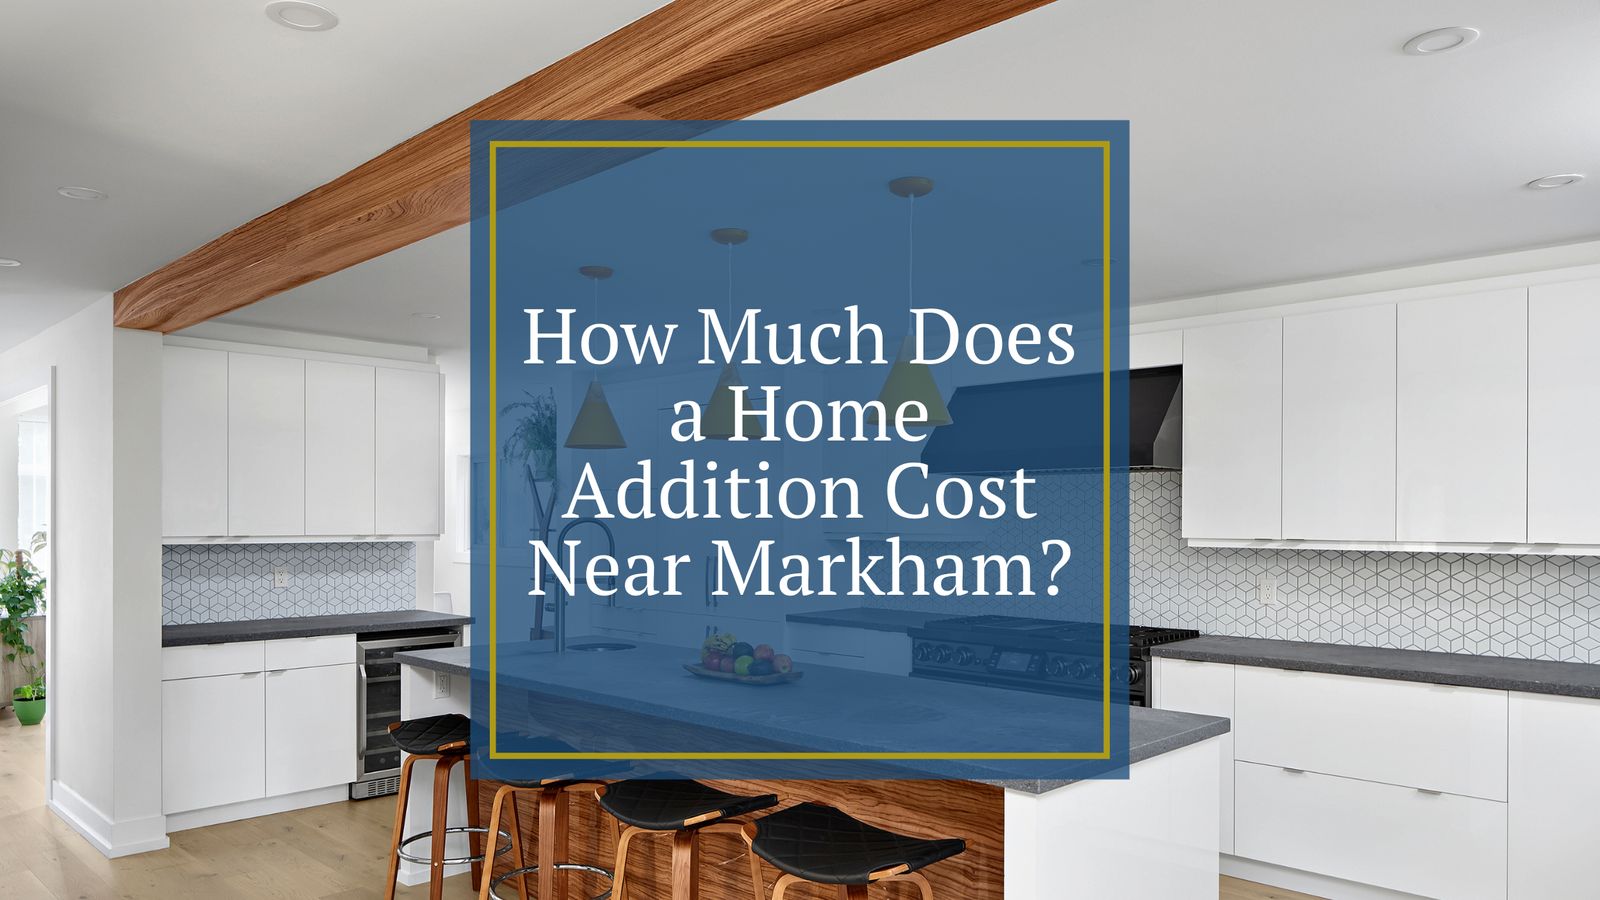 How Much Does a Home Addition Cost Near Markham?